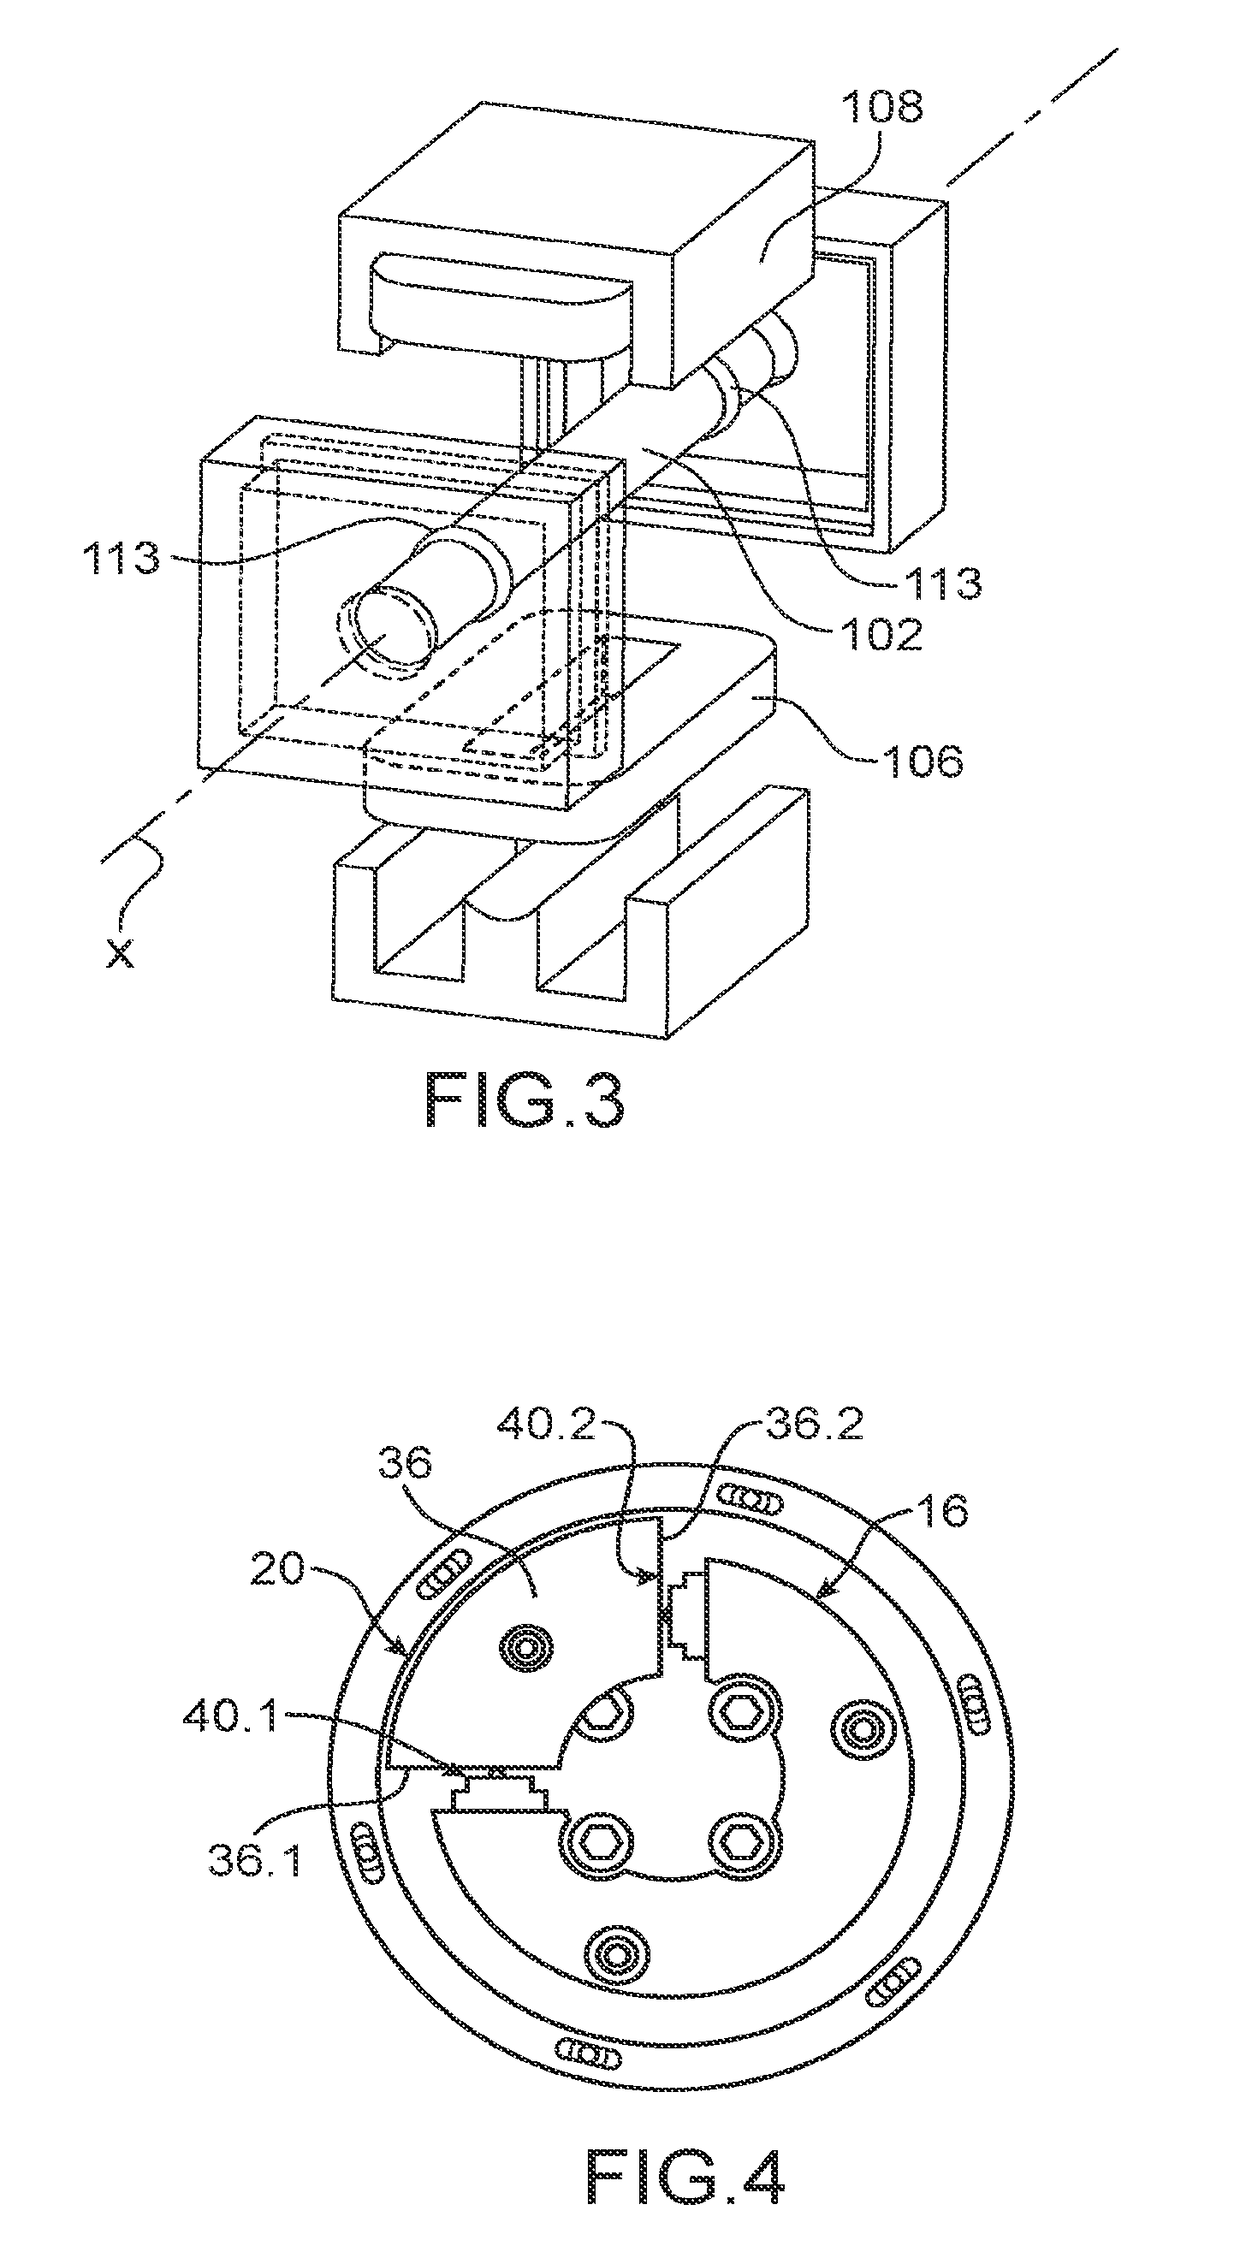 Haptic interface providing improved haptic feedback especially in the reproduction of a stop